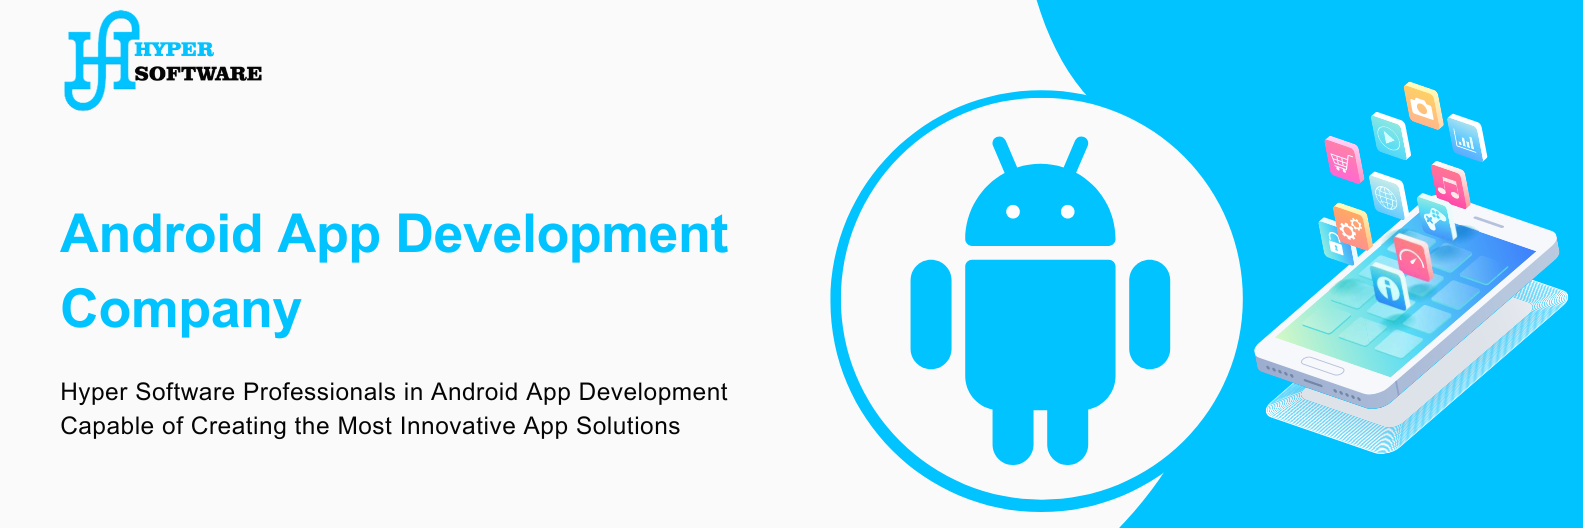 Android app development company || Hyper Software;